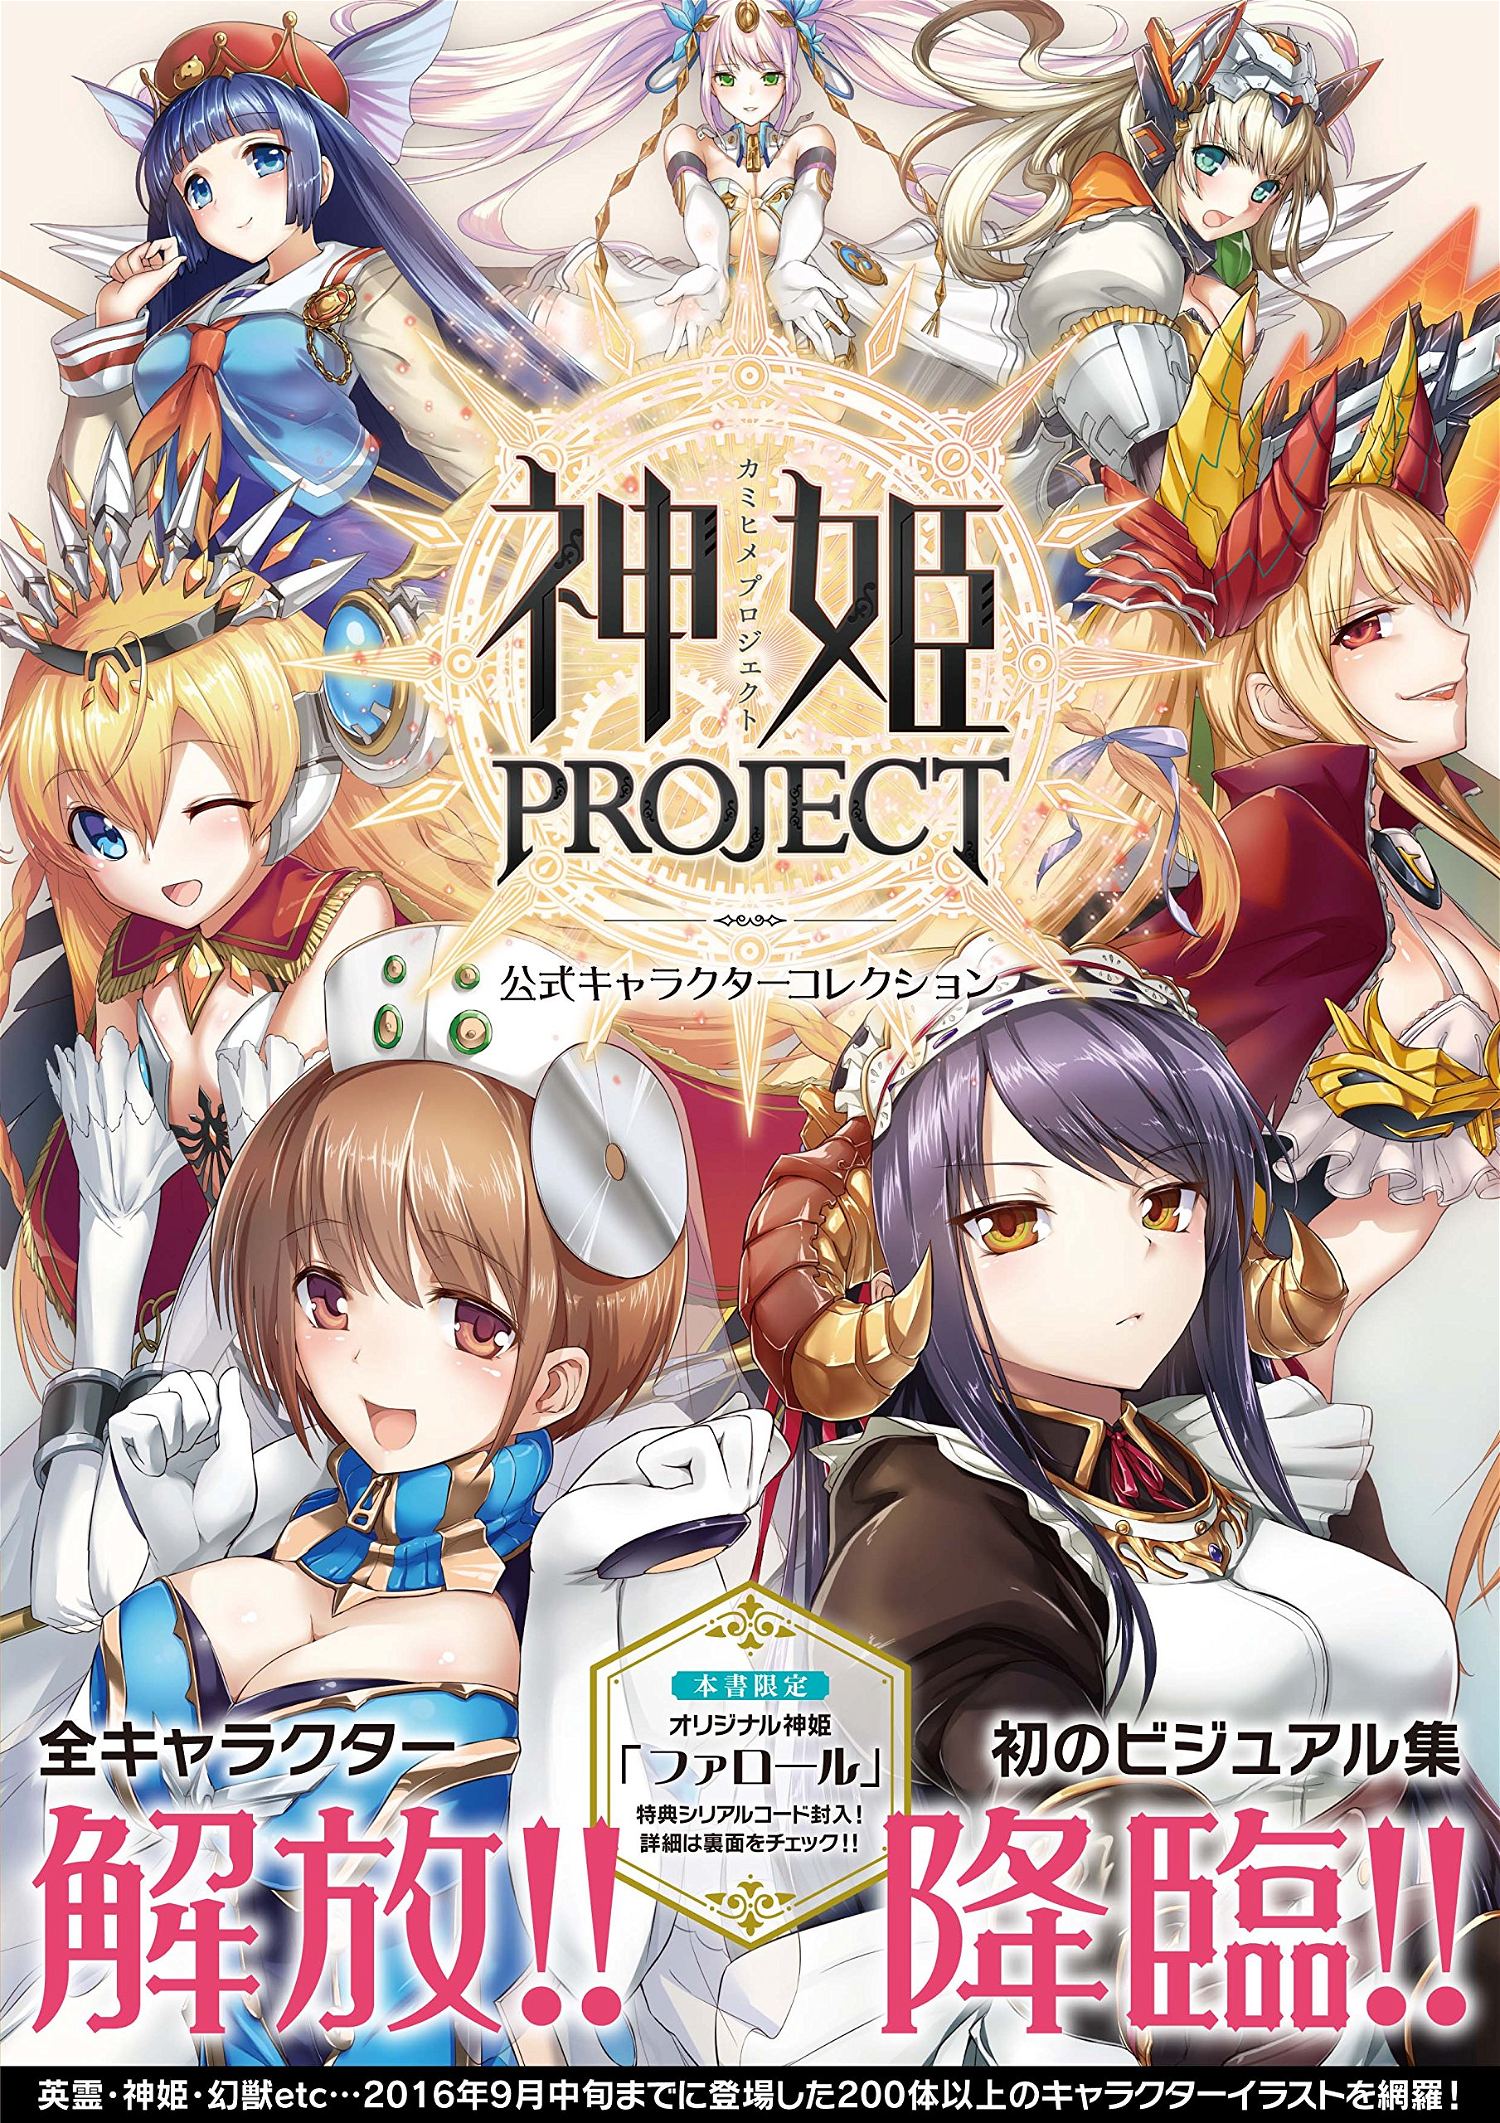 Shinki Project Official Character Collection